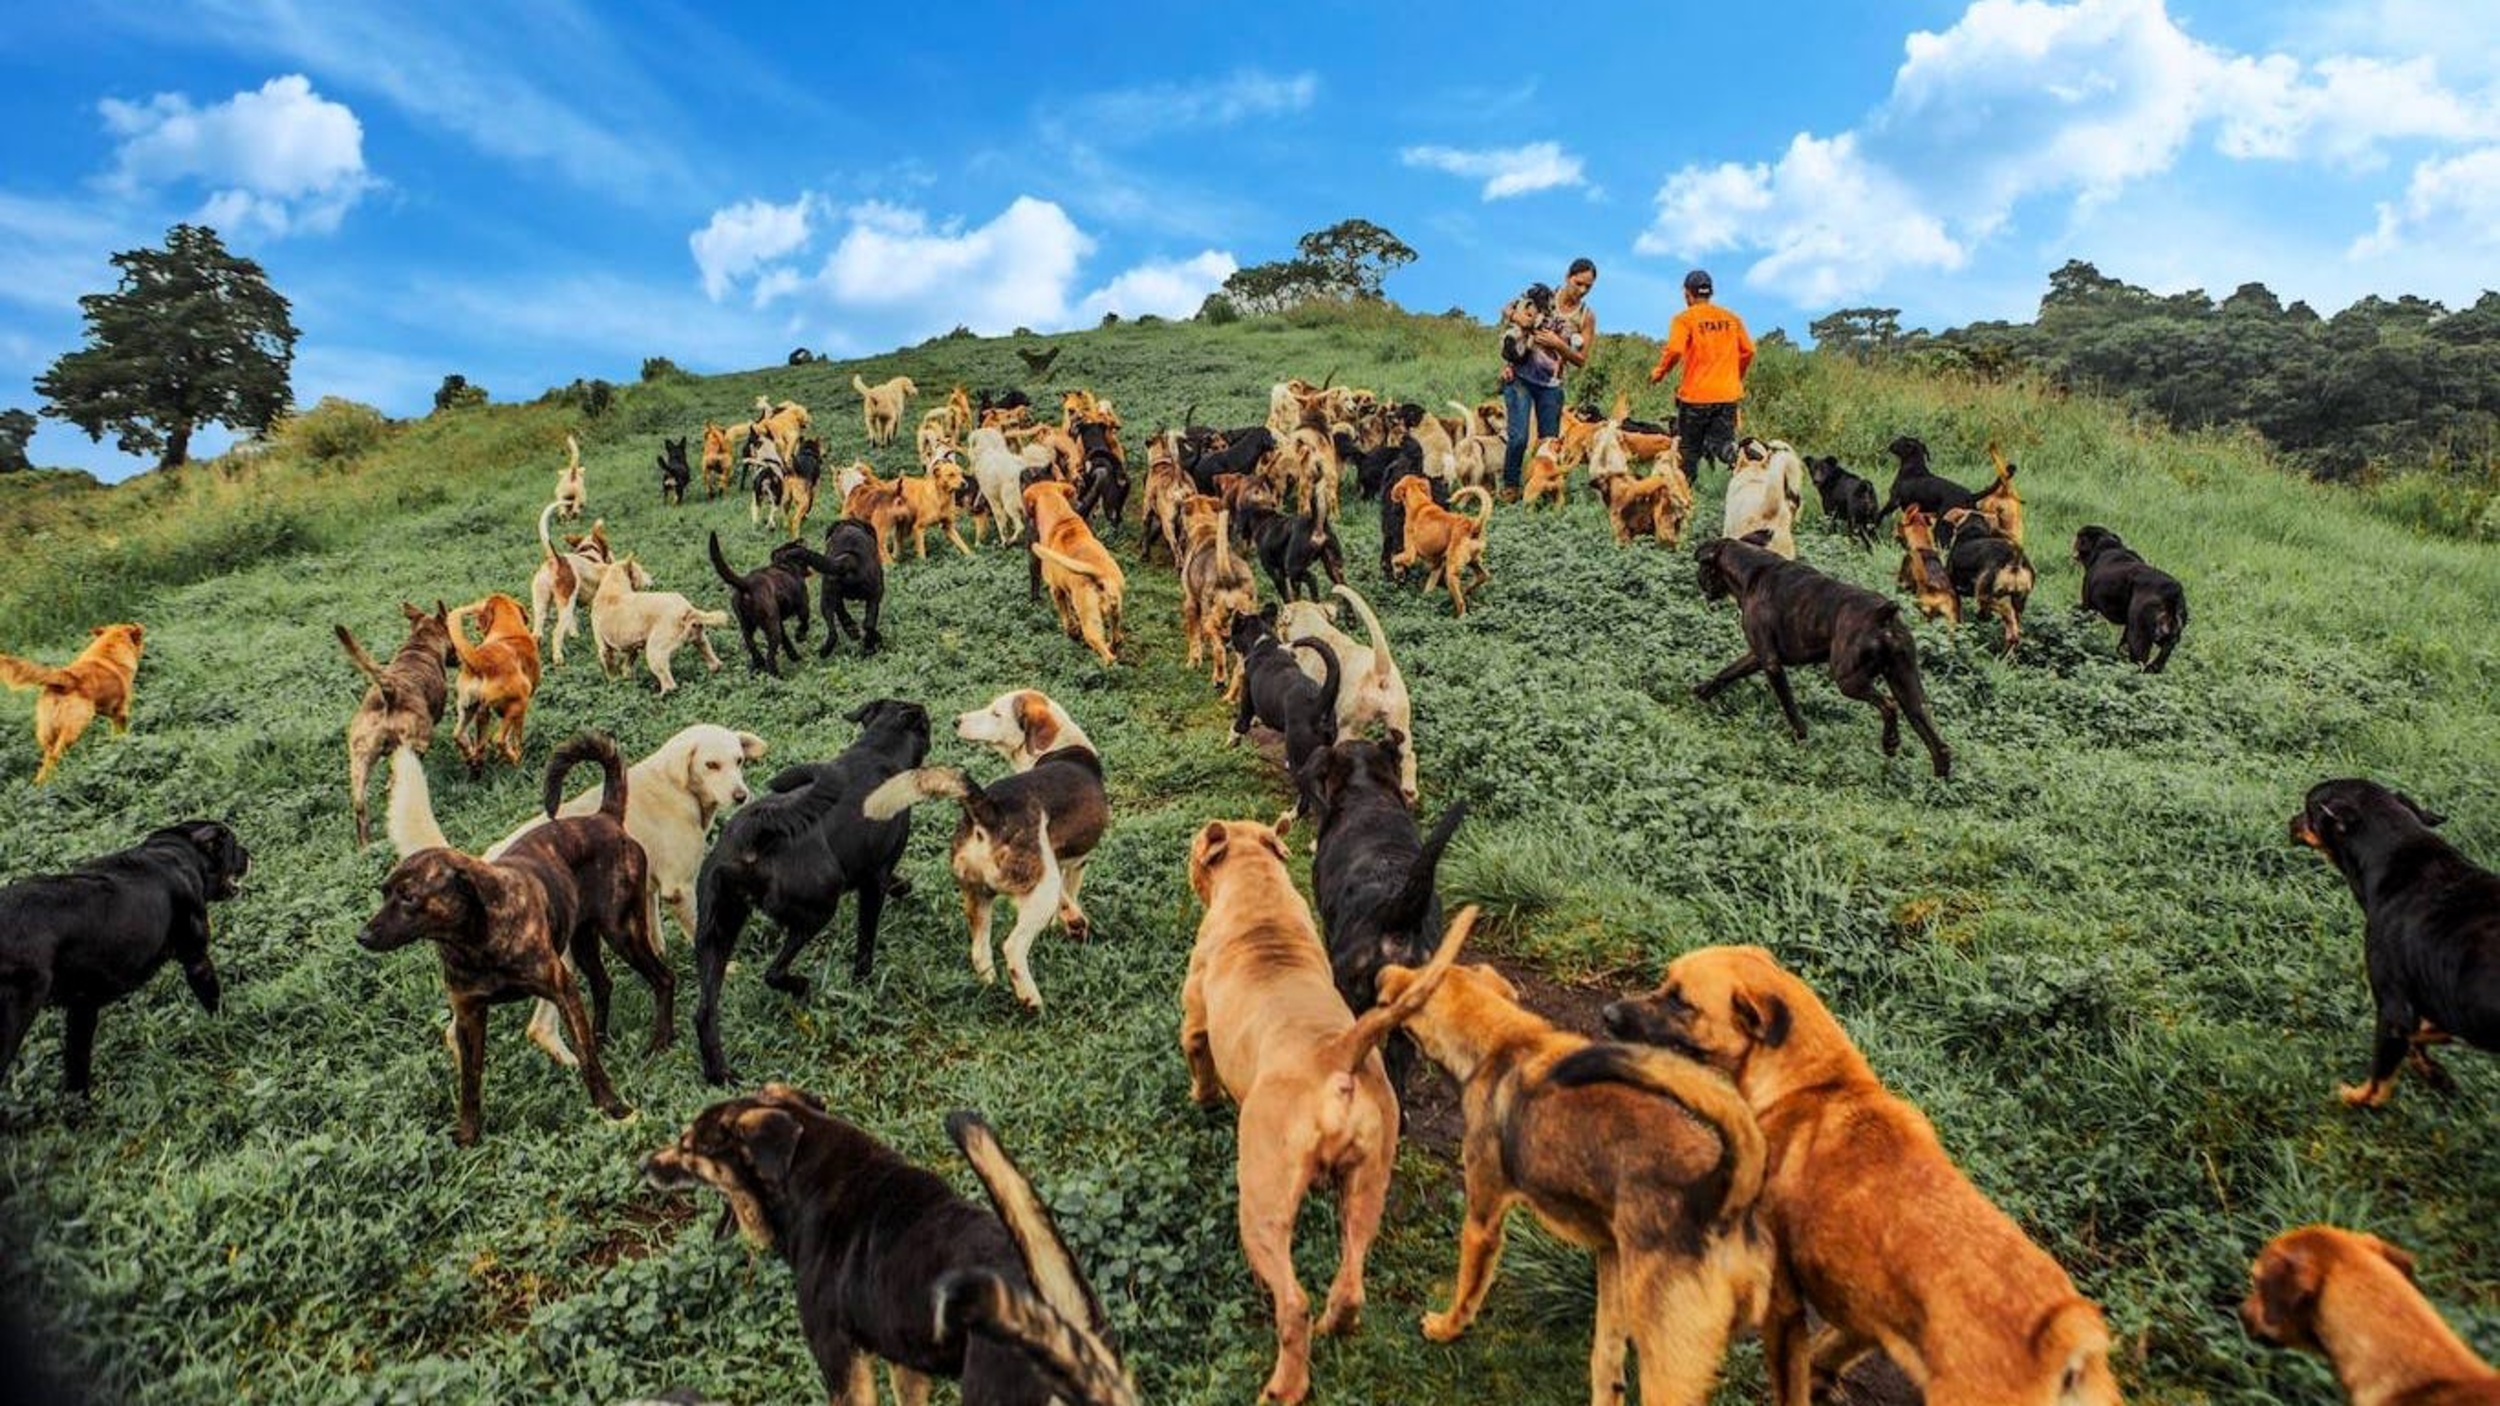 <p><span><span>Who let the dogs out? Apparently, everyone, since this country has more strays than most countries, have people. Territorio takes thousands of strays and nurses them to health, giving them a place to roam and letting visitors hike alongside them. Dog lovers will not know where to look. </span></span></p><p>You may also like: <a href='https://www.yardbarker.com/lifestyle/articles/21_things_you_didnt_know_about_burger_king_093023/s1__38423578'>21 things you didn’t know about Burger King</a></p>